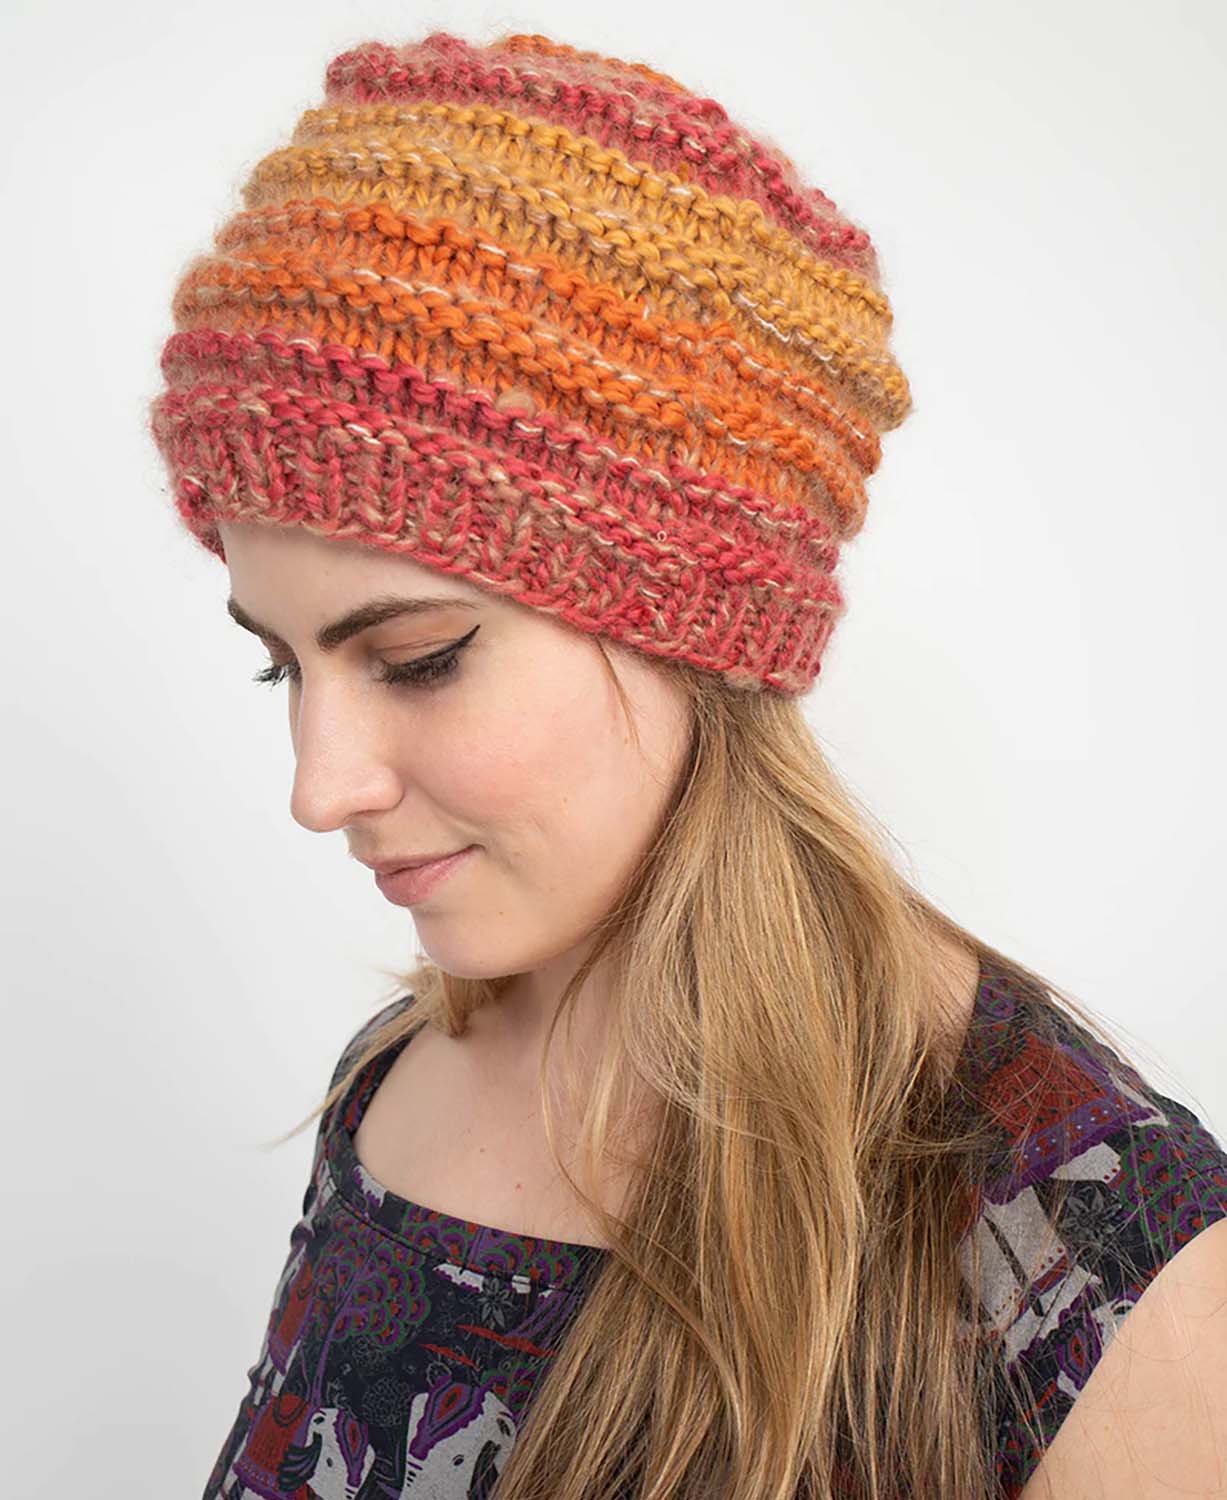 NEW! Candy Apple Striped Beanie